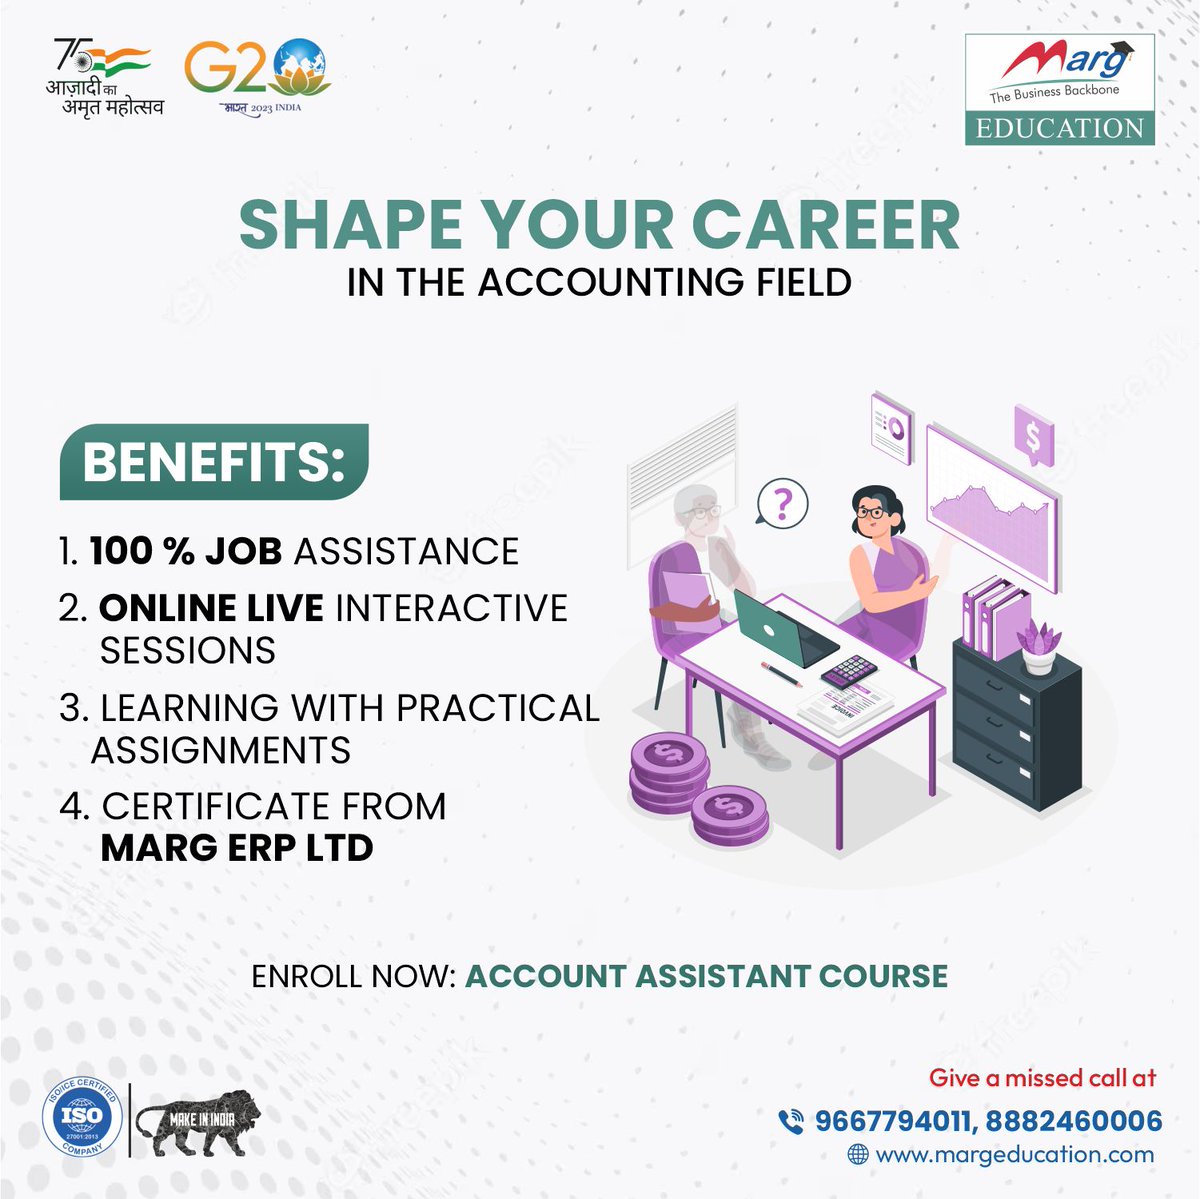 #ShapeYourCareer in Accounting! 🎓 ✅ 100% Job Support 💻 Live Online Sessions 📝 Practical Assignments 📜 Certificate by Marg ERP Enroll at margeducation.com 🌟 #AccountingCourse